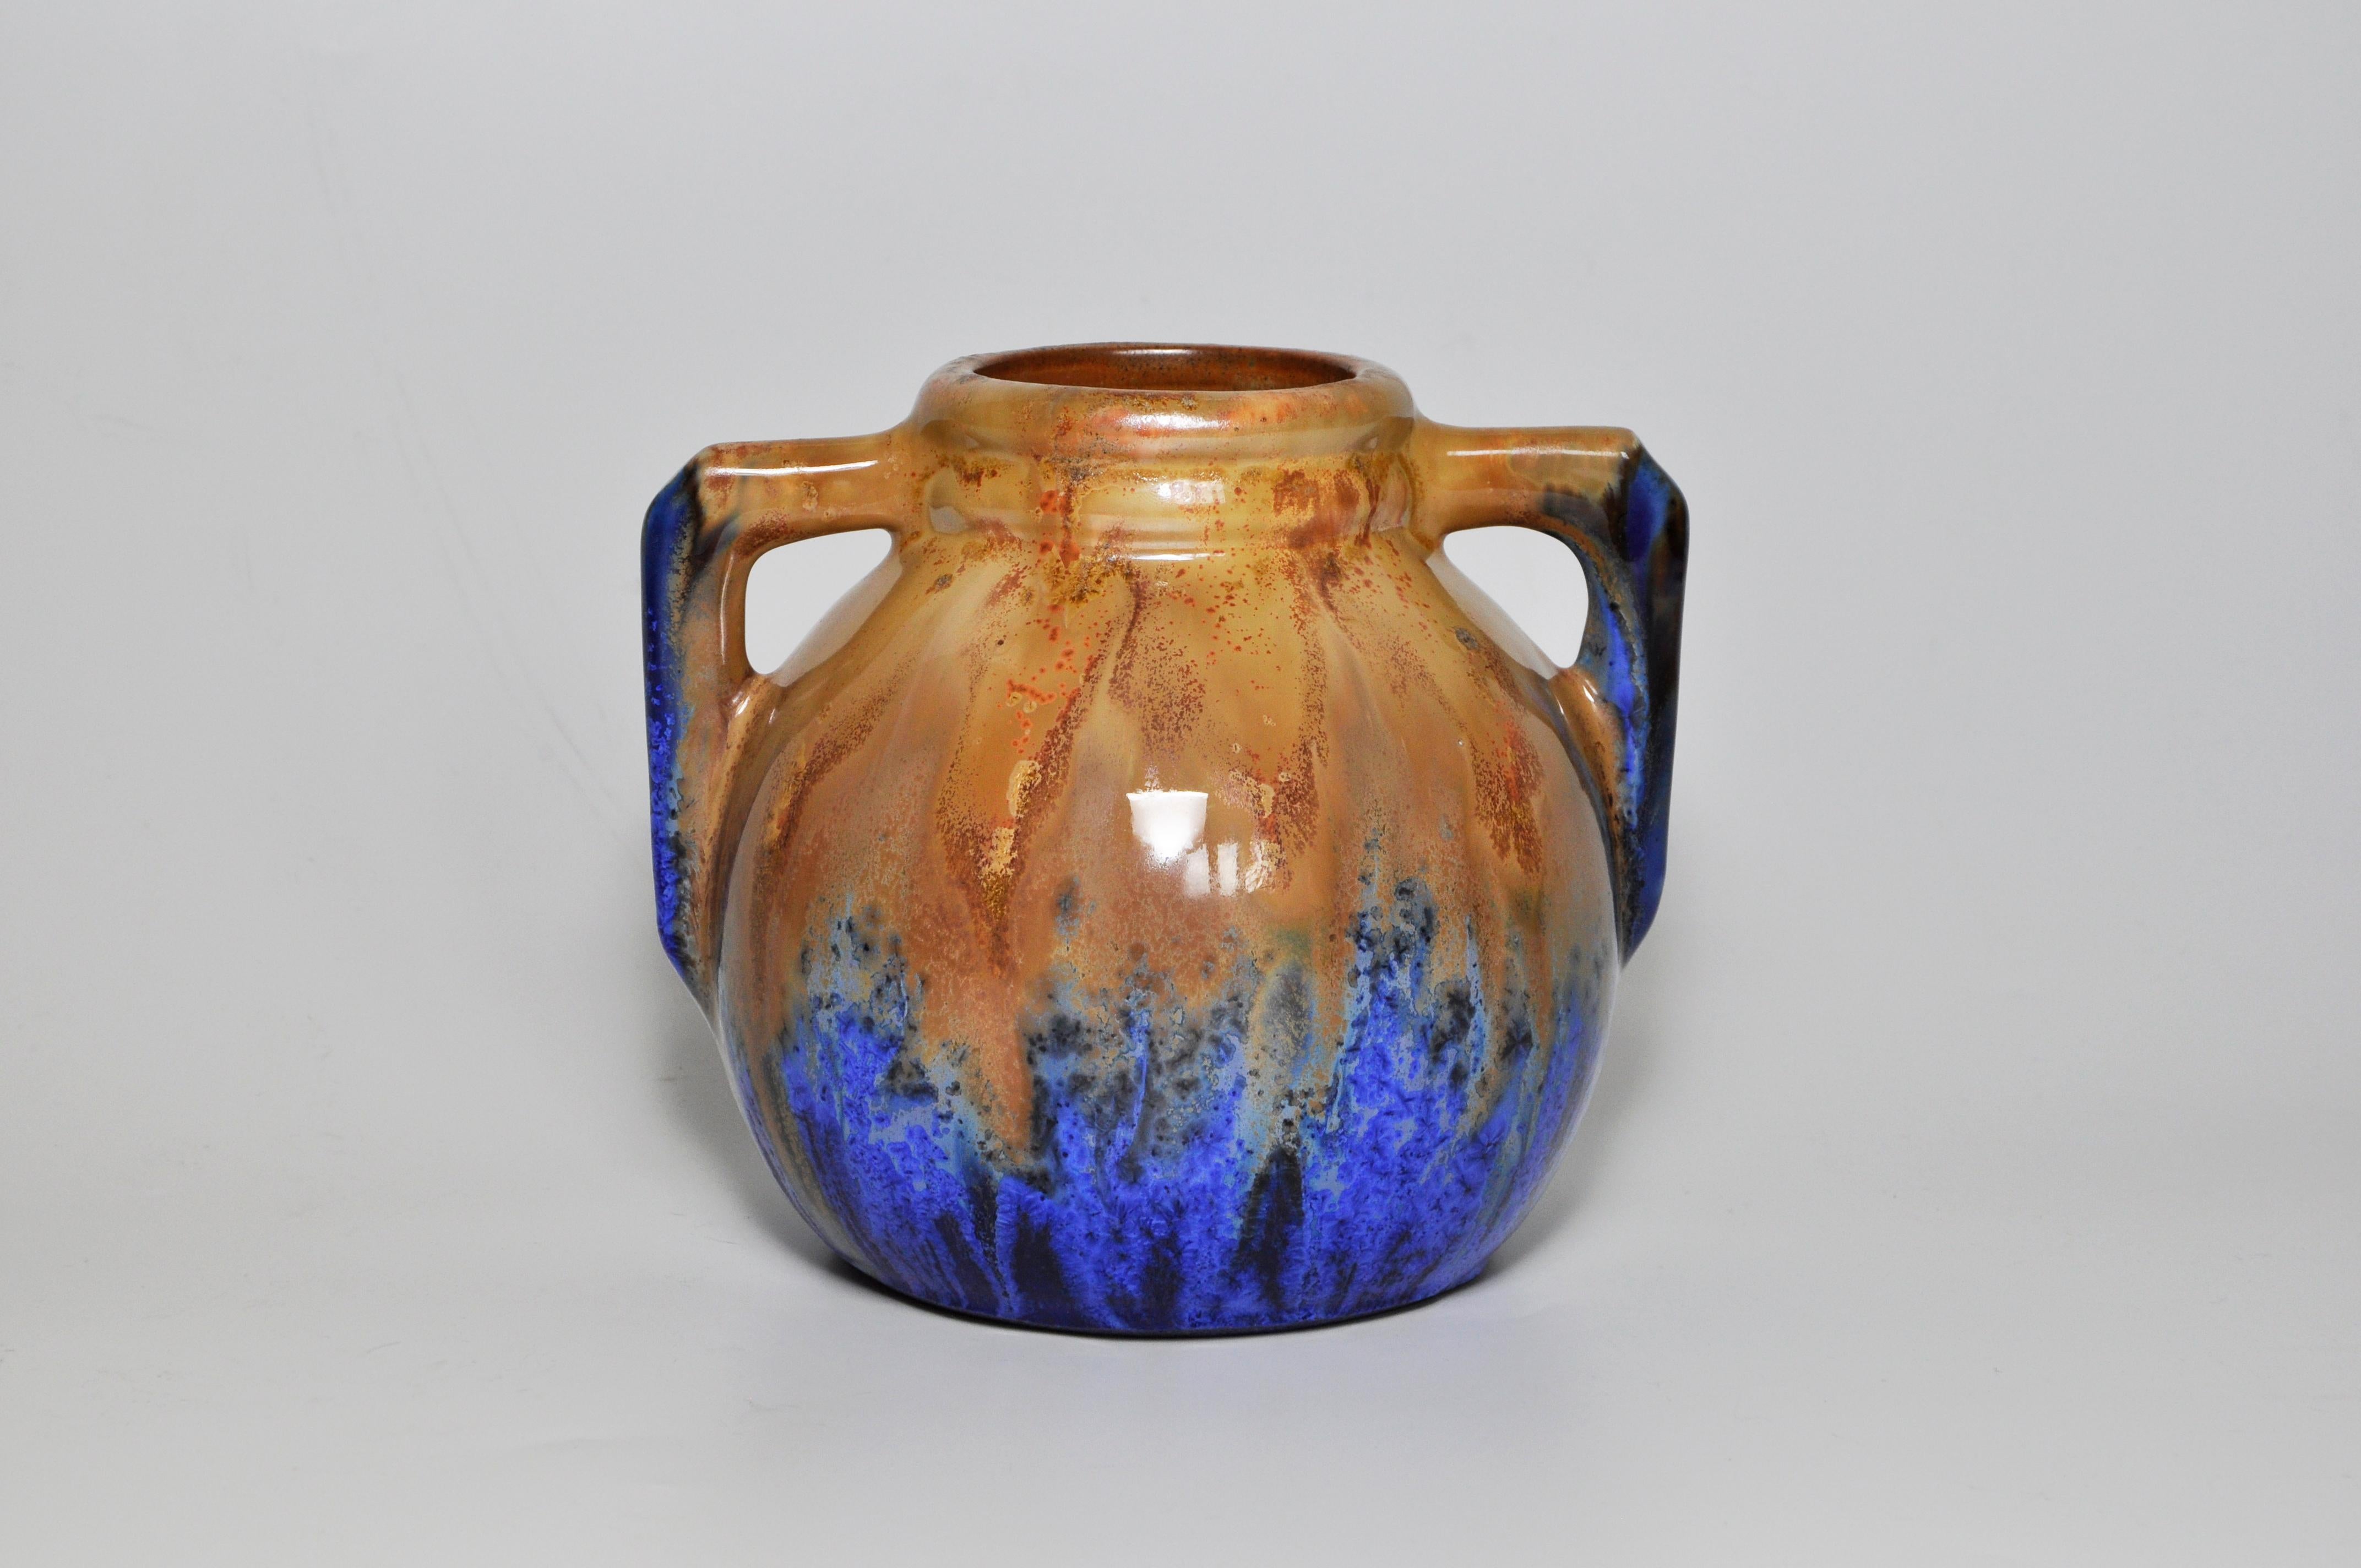 French Art Pottery Metenier blue ceramic vase pot

Made from stoneware and signed on the base by ‘G.Métenier’ for Gilbert Metenier. An artist potter who worked from 1907 until 1940 noted for his variety of shapes and interesting experimental glaze